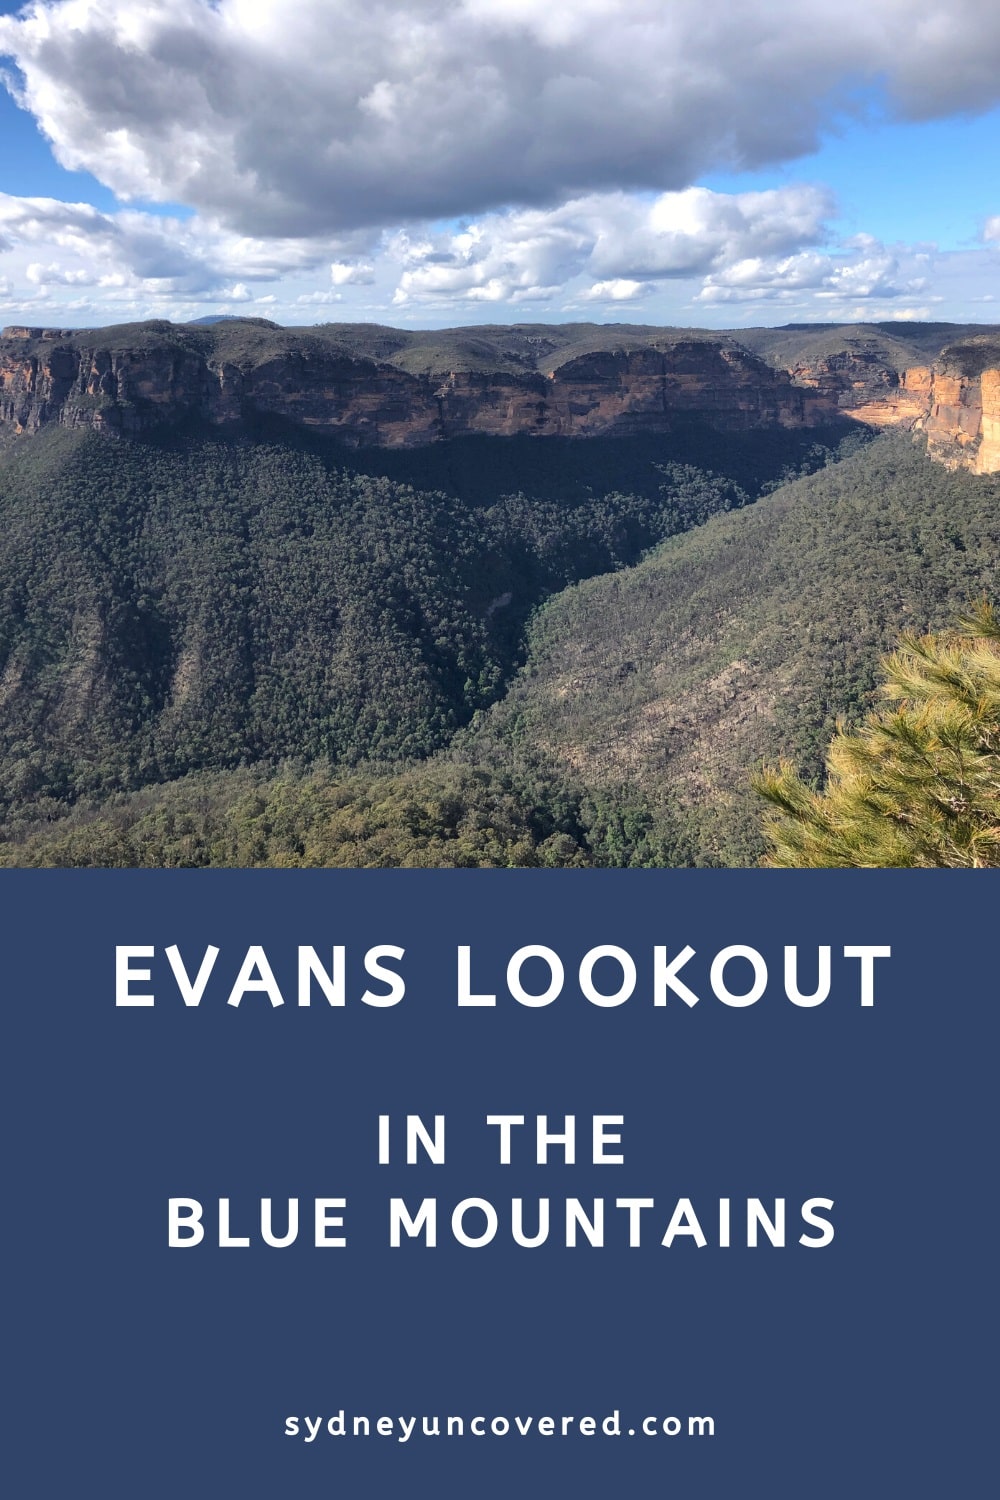 Evans Lookout in the Blue Mountains